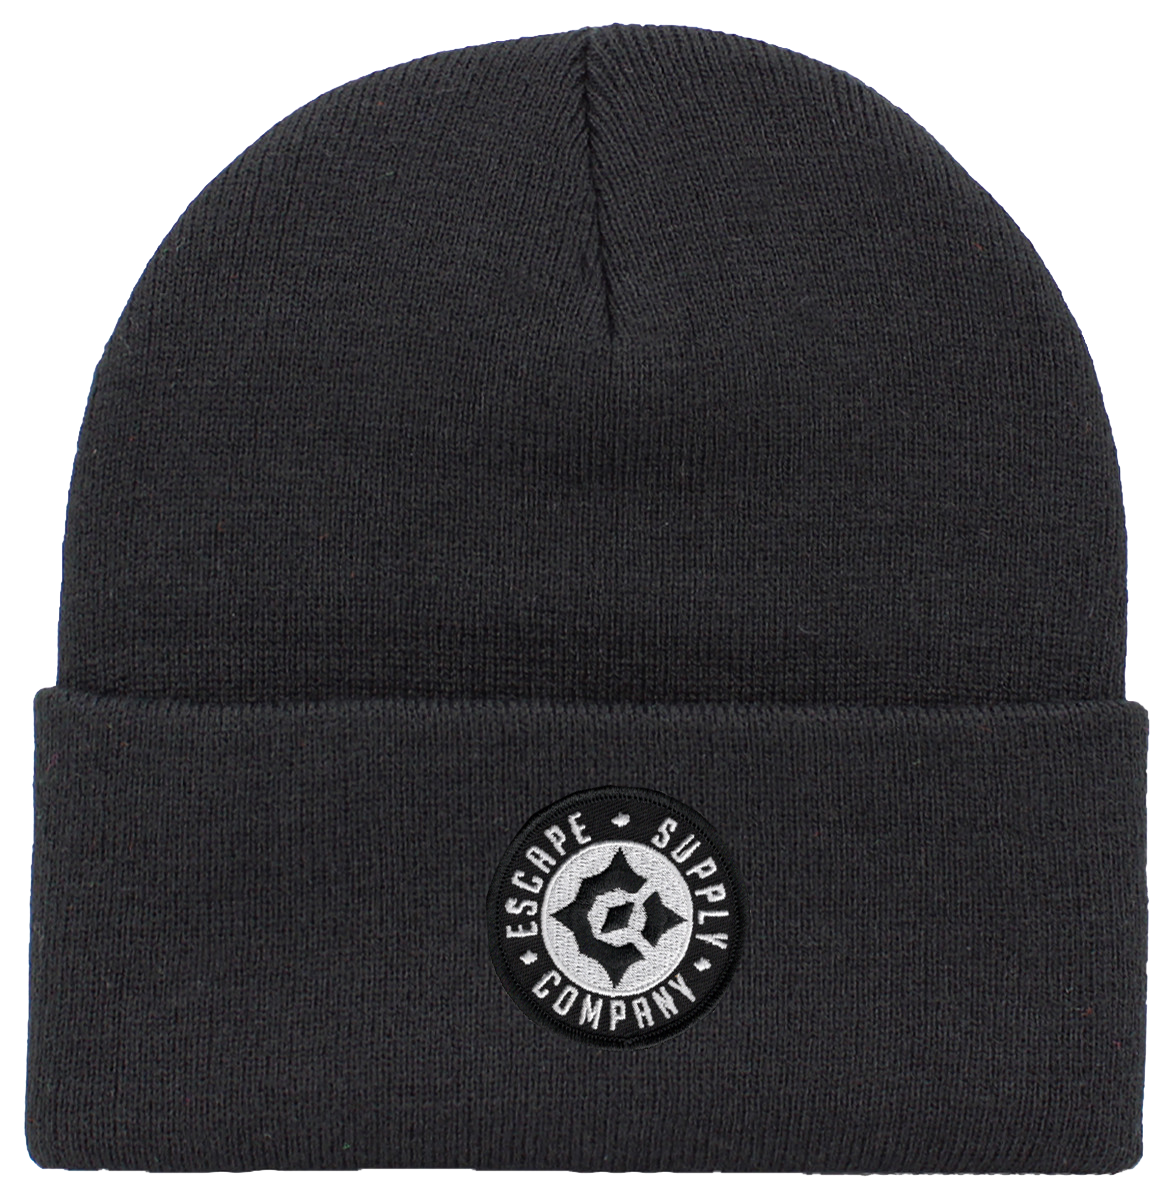 Beanie Cap with Compass